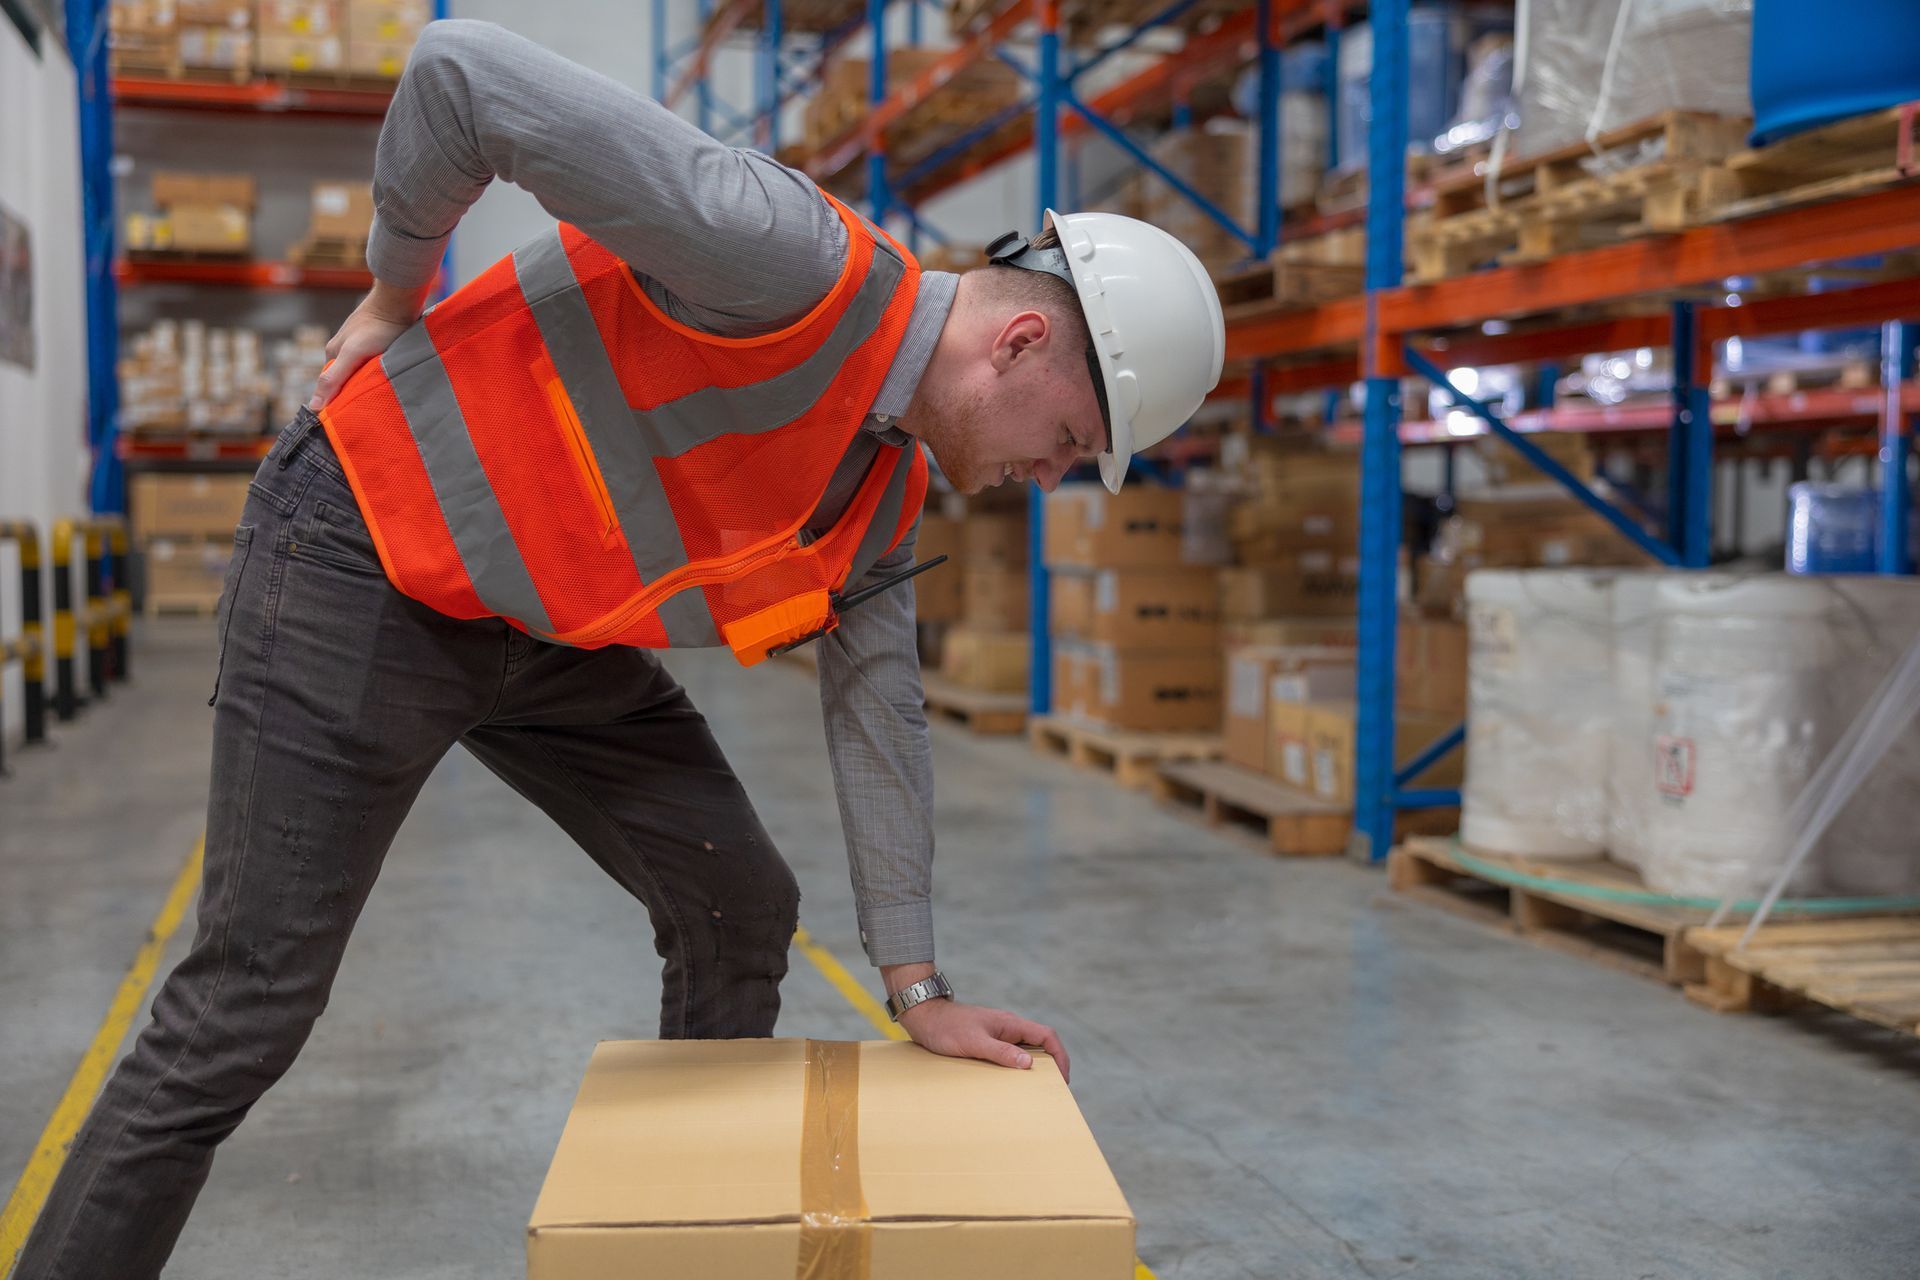 A man is holding his back while lifting a box in a warehouse.